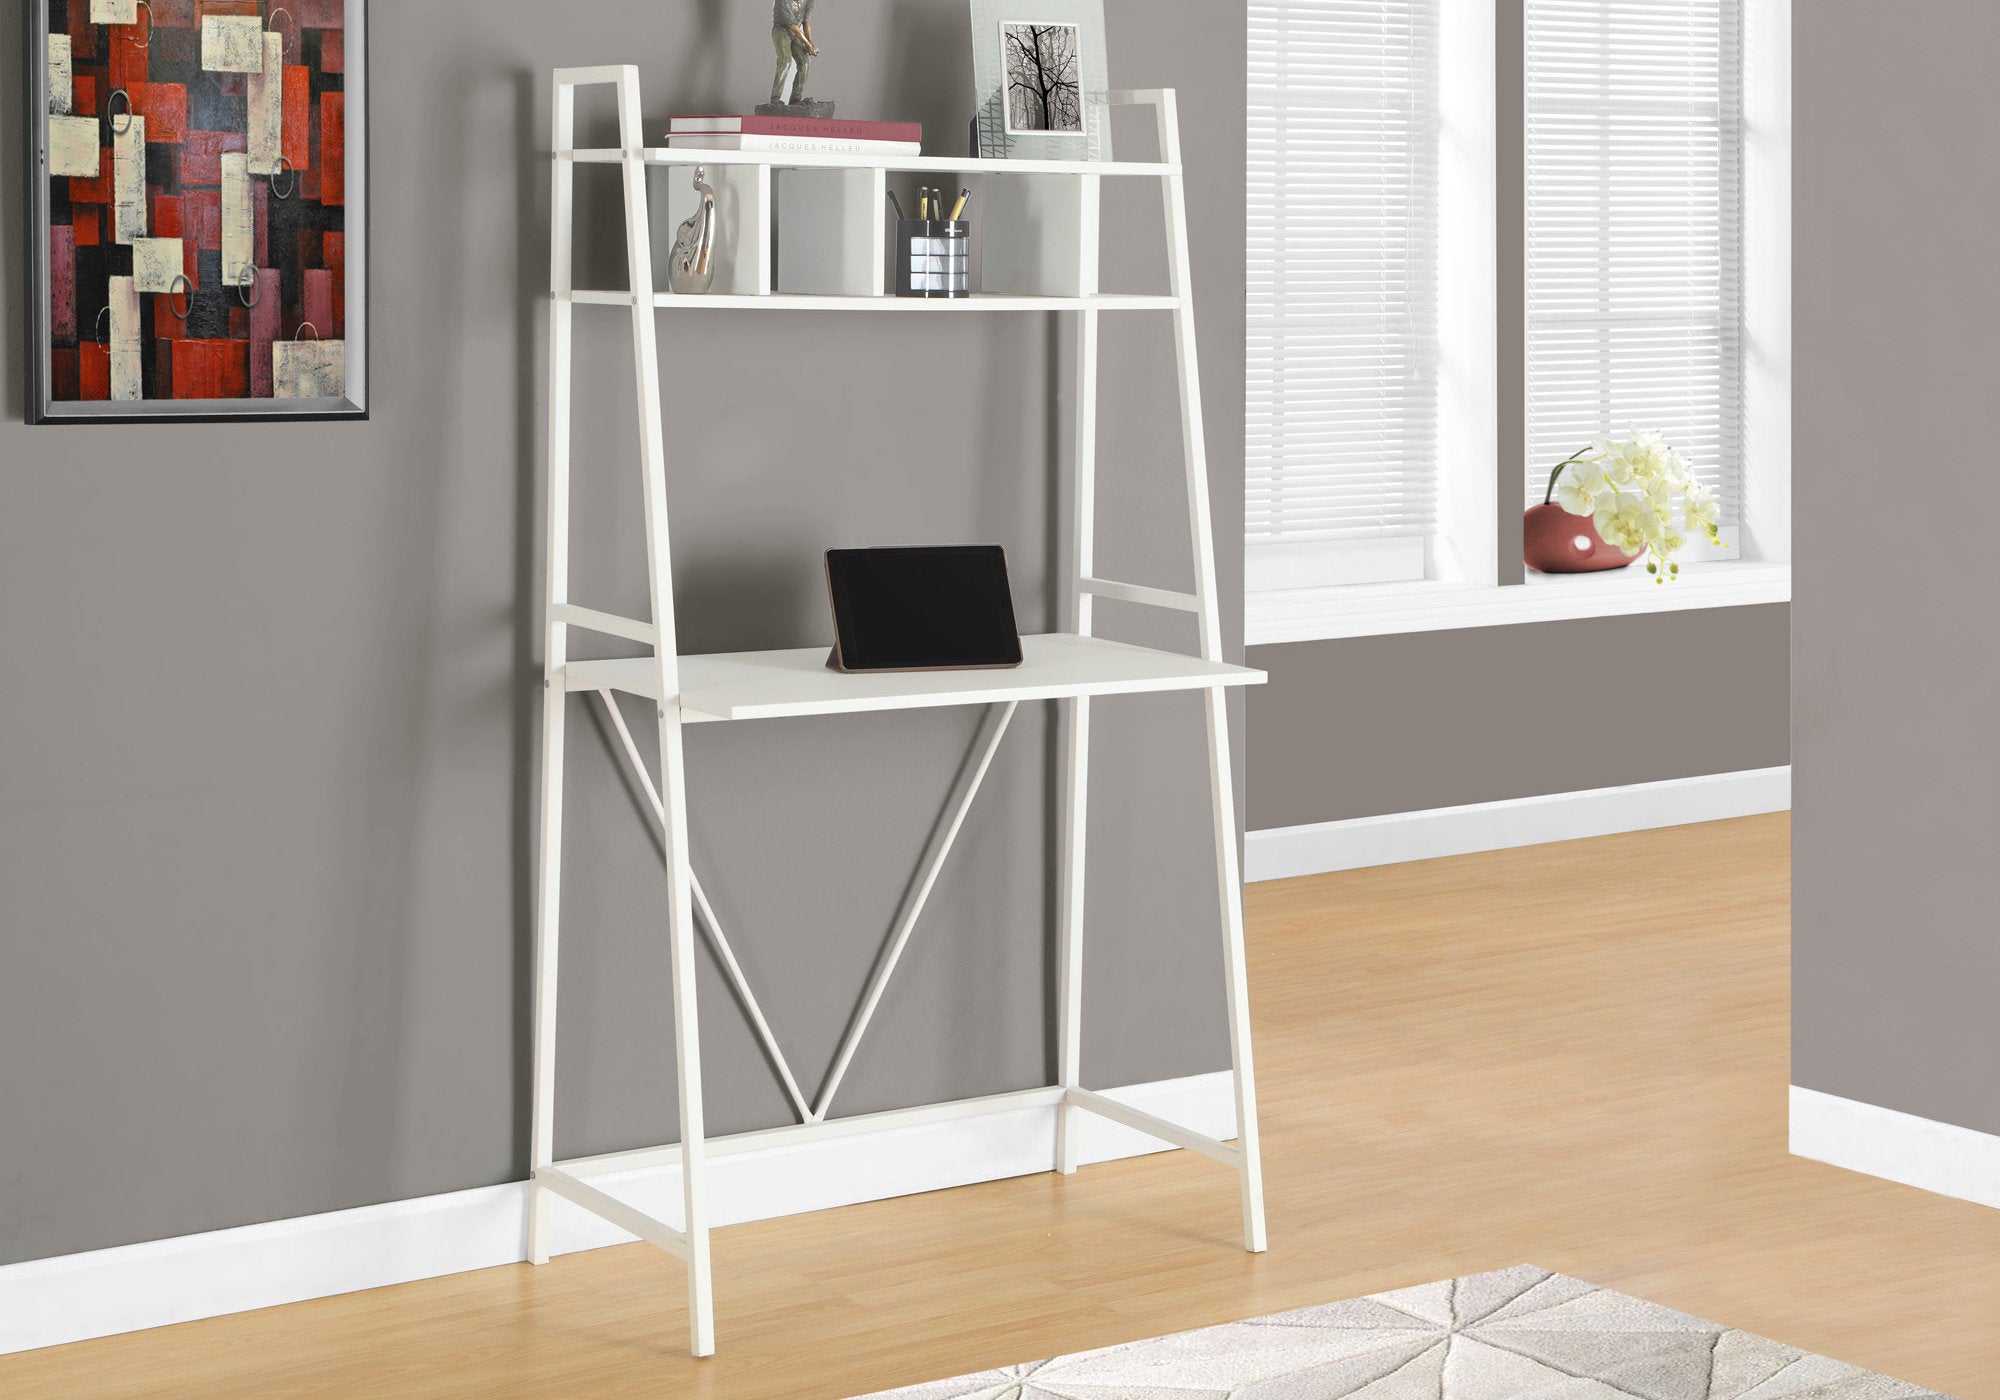 MN-327163    Computer Desk, Home Office, Laptop, Leaning, Storage Shelves, Metal, White, White, Contemporary, Modern